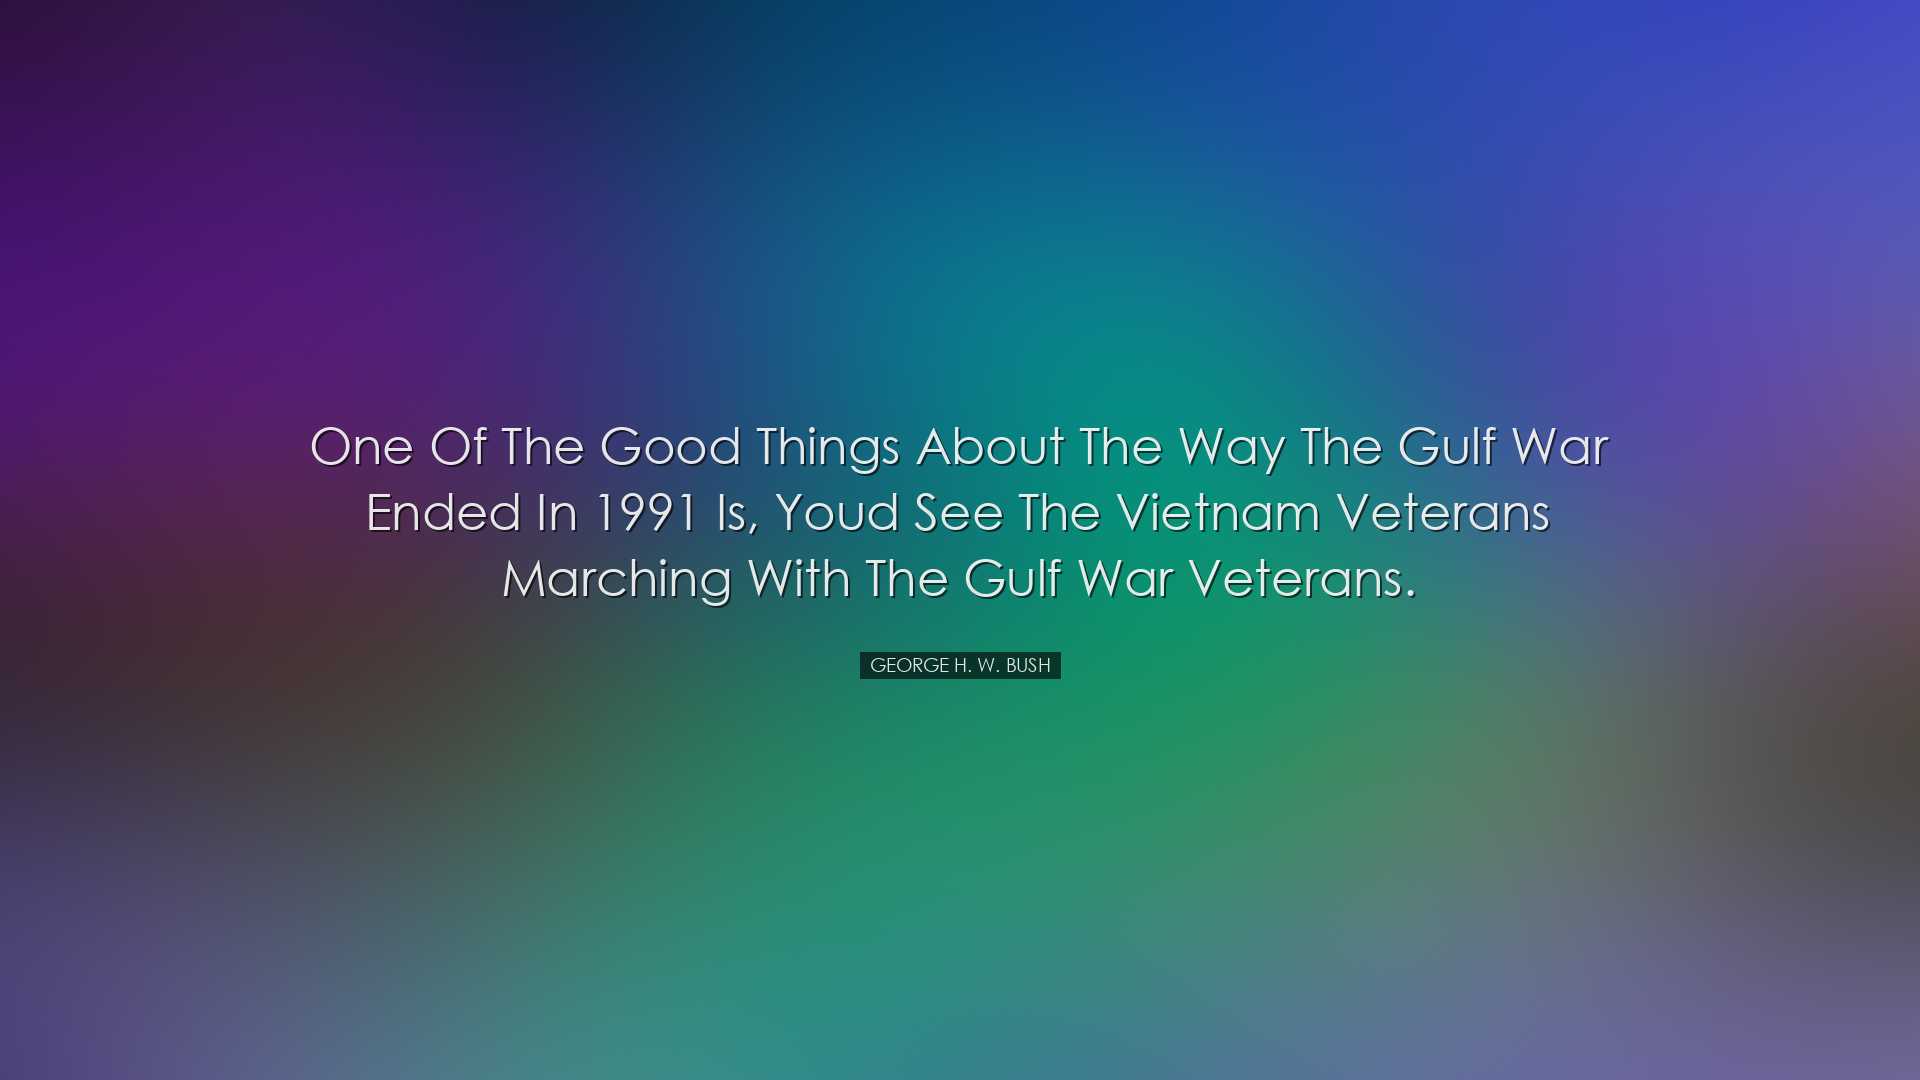 One of the good things about the way the Gulf War ended in 1991 is